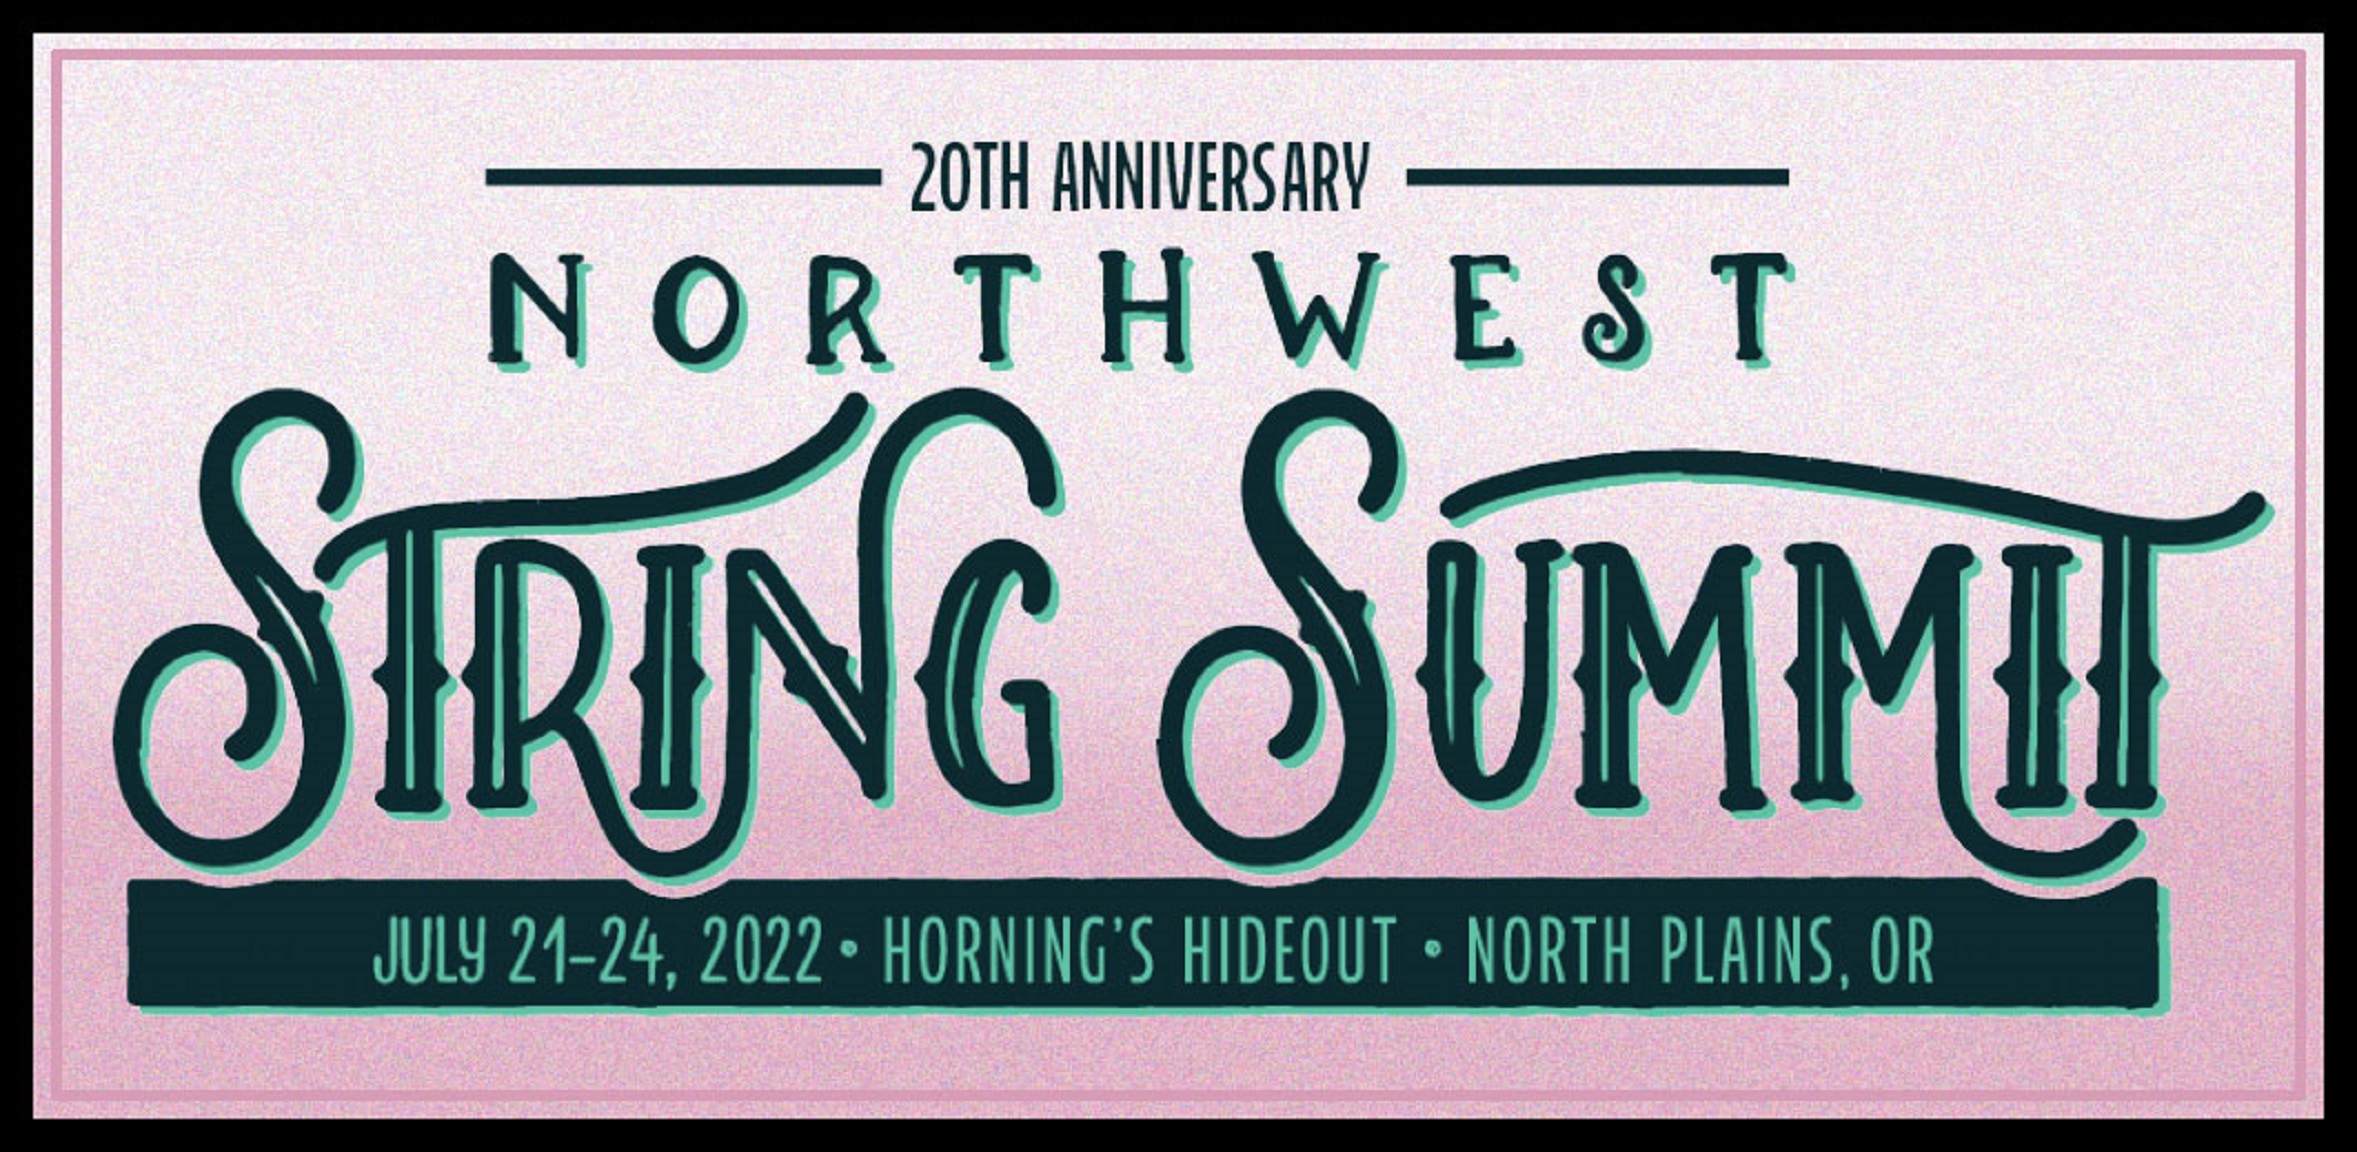 Northwest String Summit - A Musical Haven for 20 Years